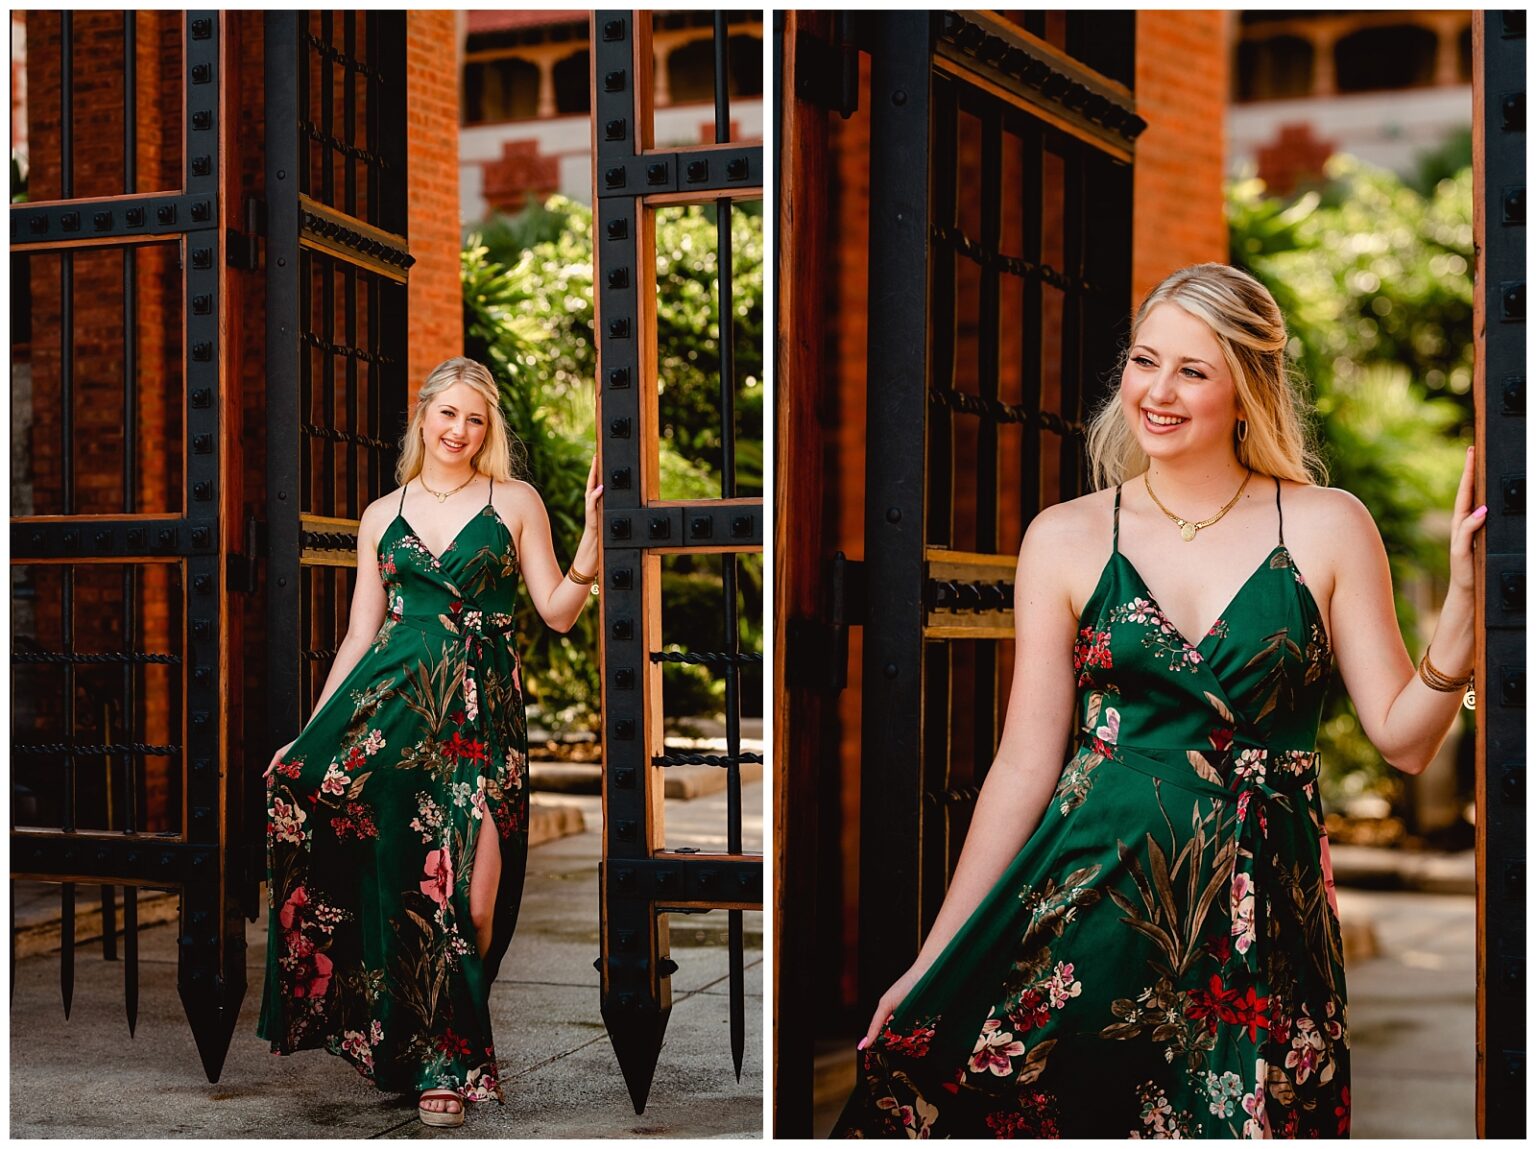 St Augustine historic town, Florida. Senior photos with historic buildings. Green floral dress for senior picture outfit.